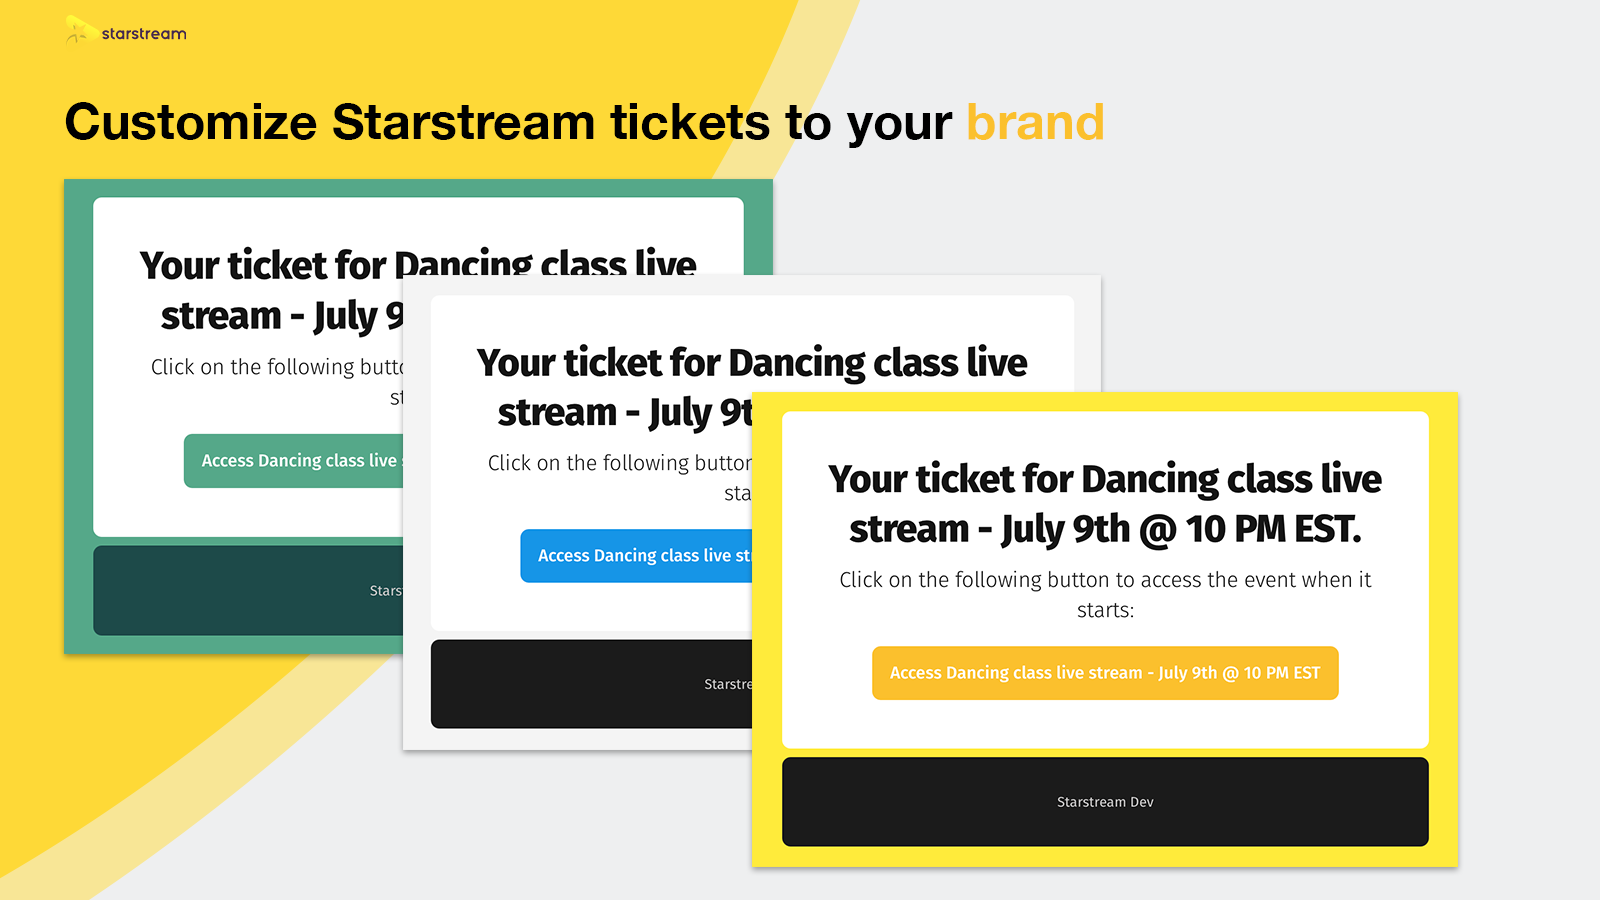 Customize Starstream emails to your brand